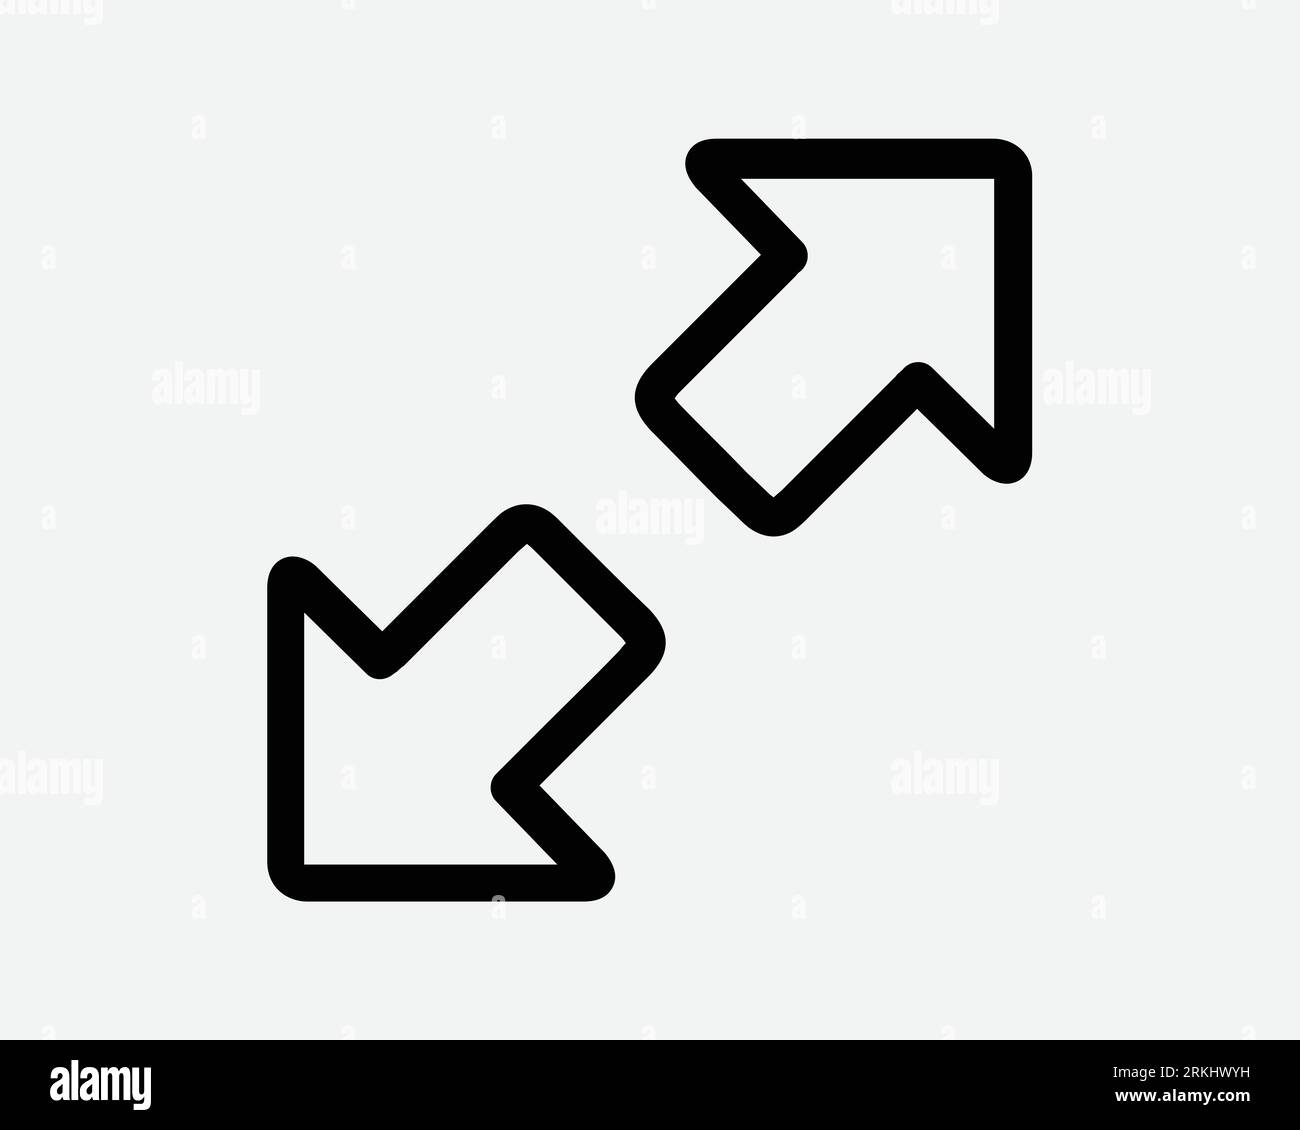 Zoom In Out Arrow Line Icon Two 2 Arrows Gesture Swipe Point Pointer Navigation Mobile Tablet Full Screen Fullscreen Black White Vector Sign Symbol Stock Vector